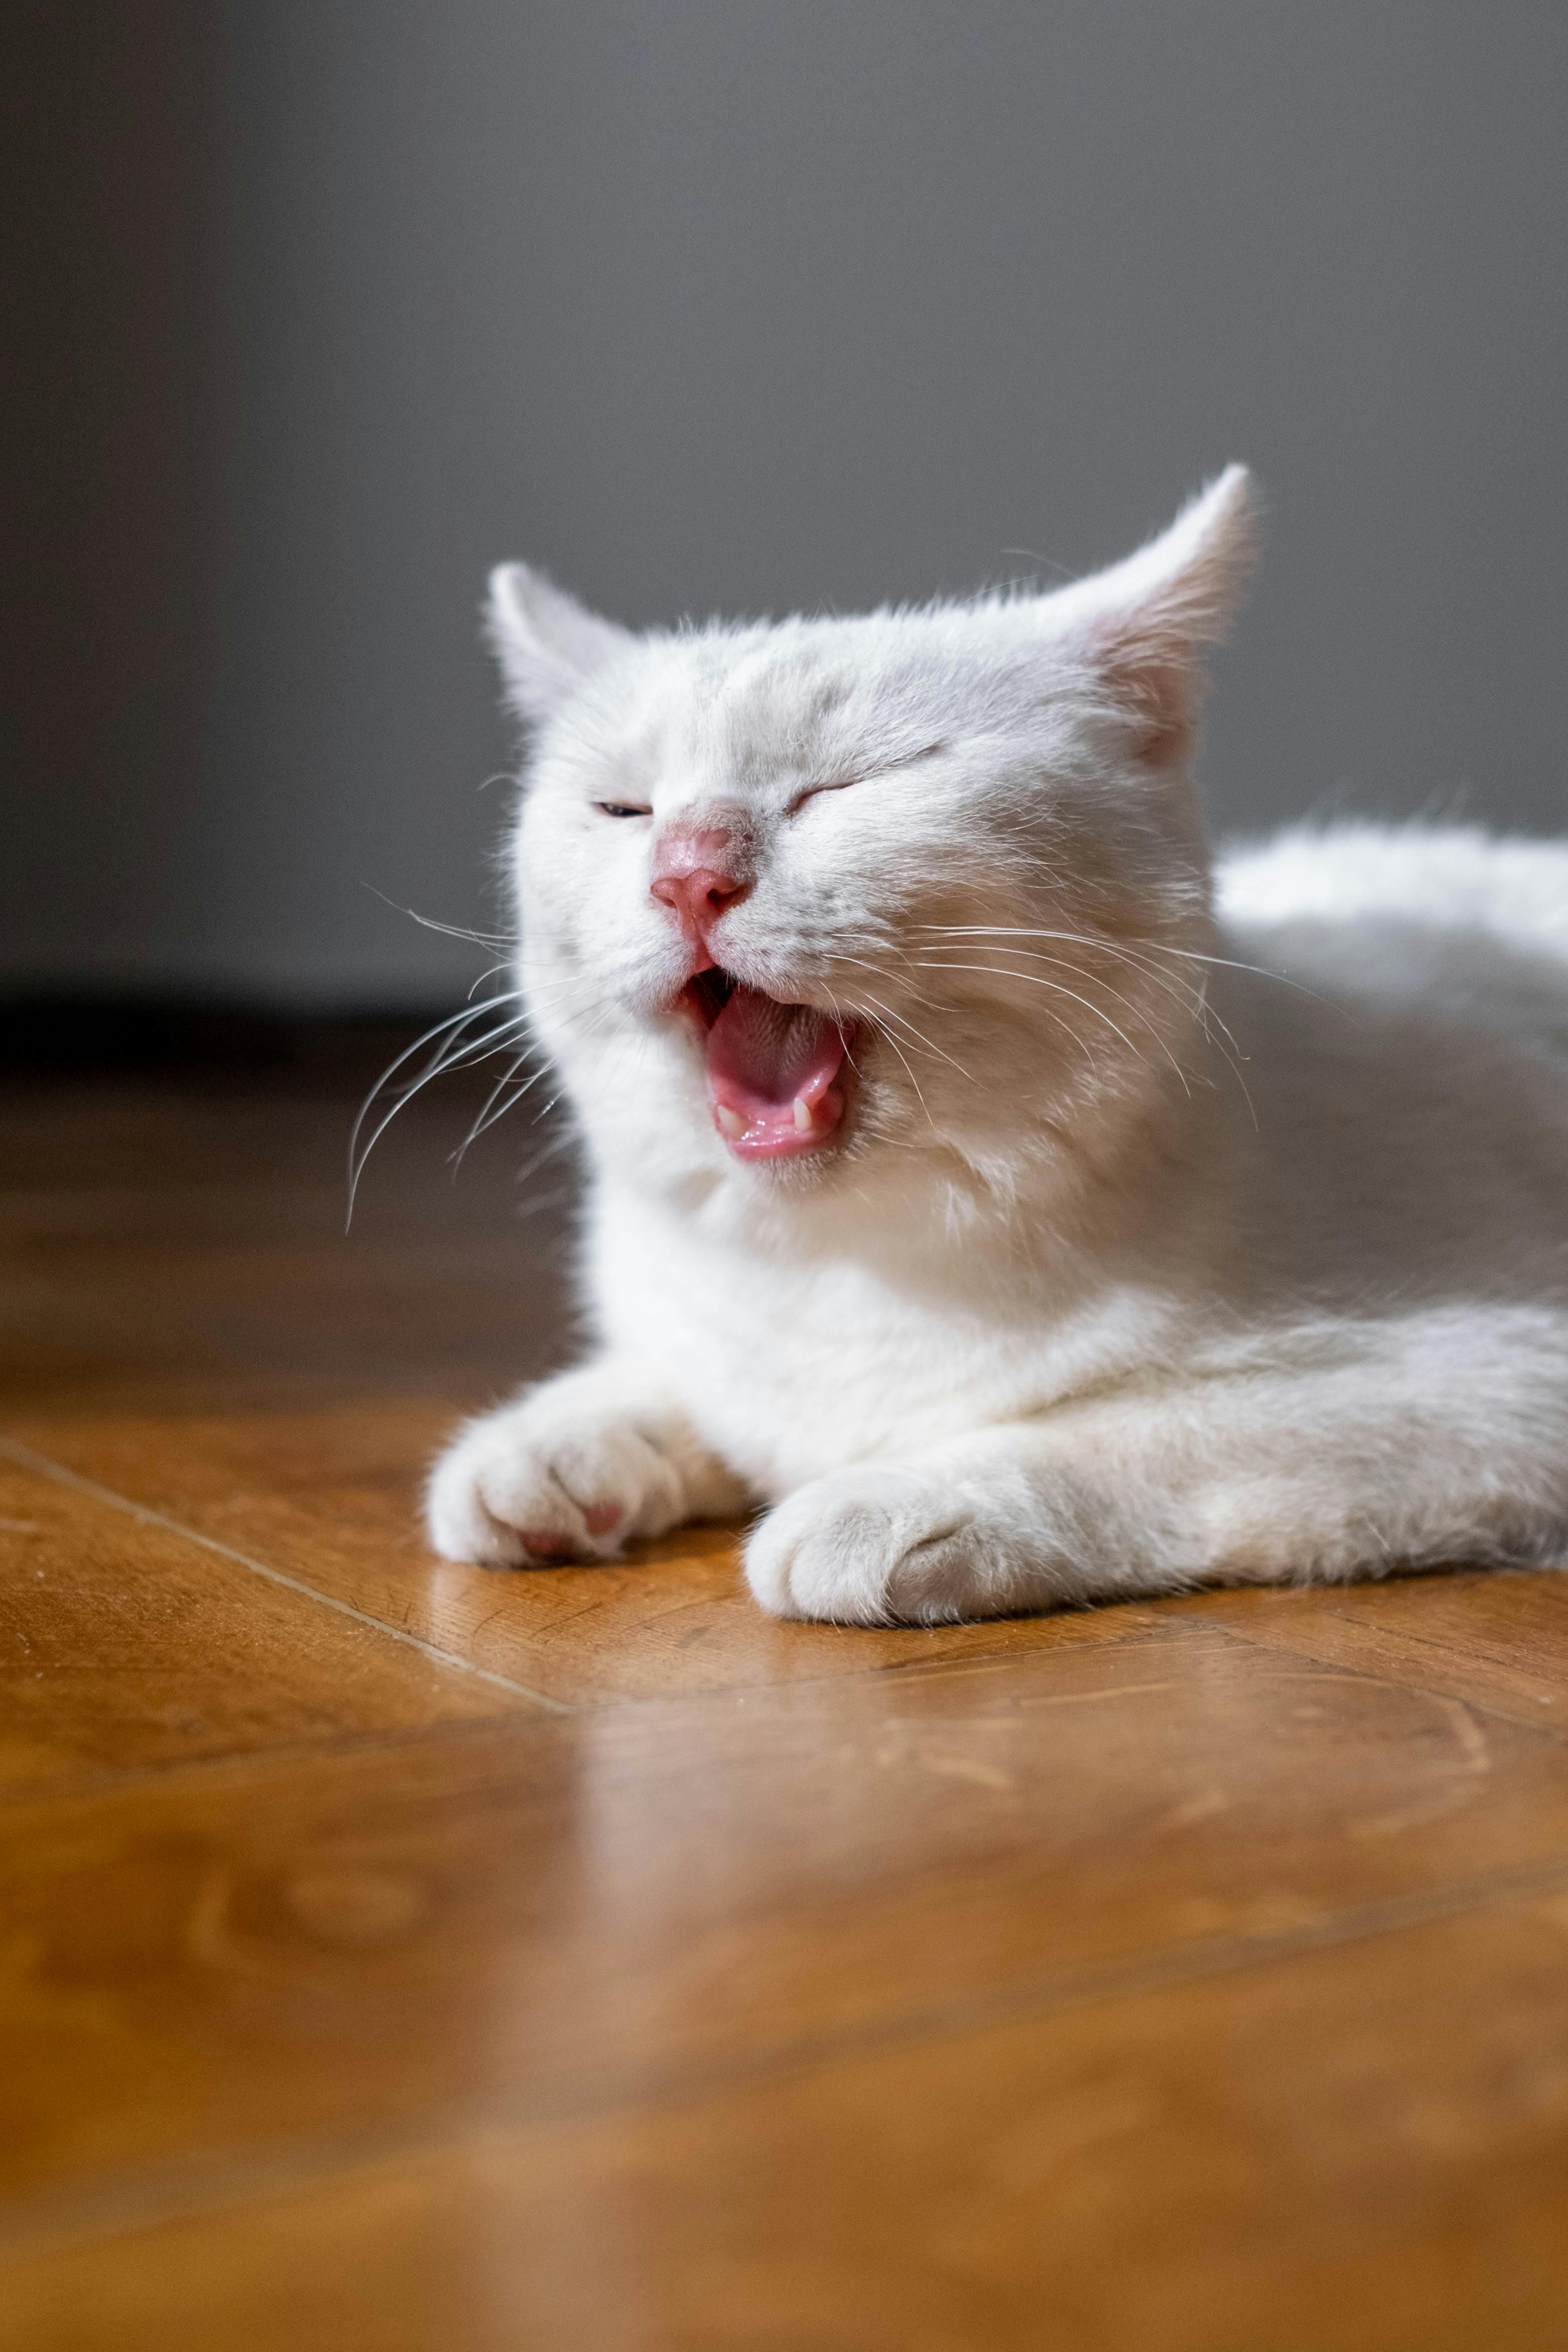 Cute White Cat Yawning while lying on a Wooden Floor · Free Stock ...